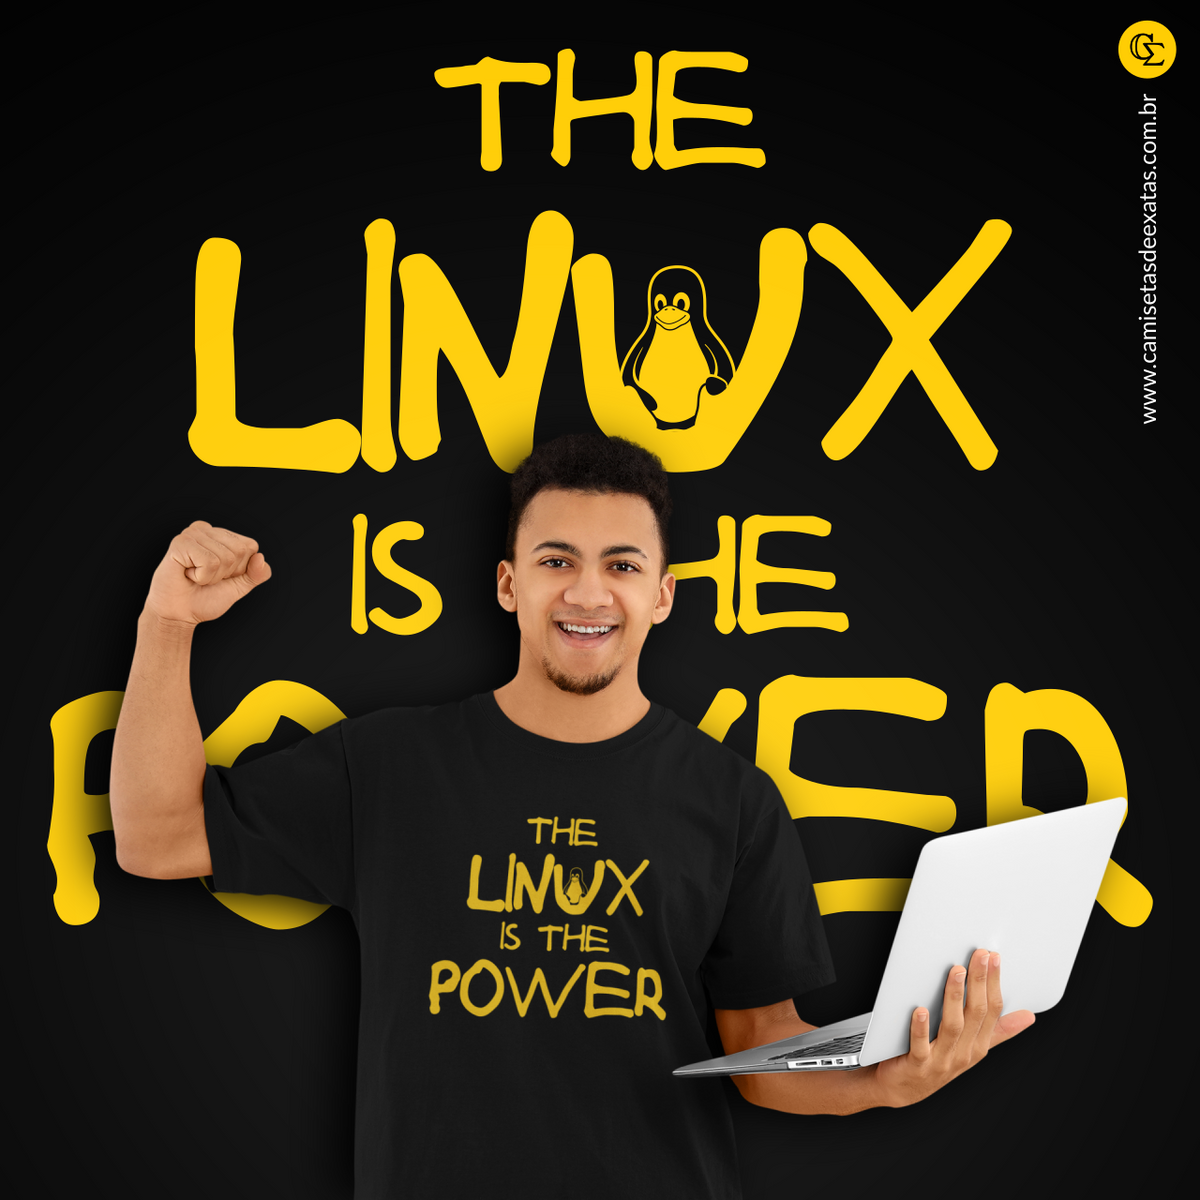 Nome do produto: THE LINUX IS THE POWER [1]